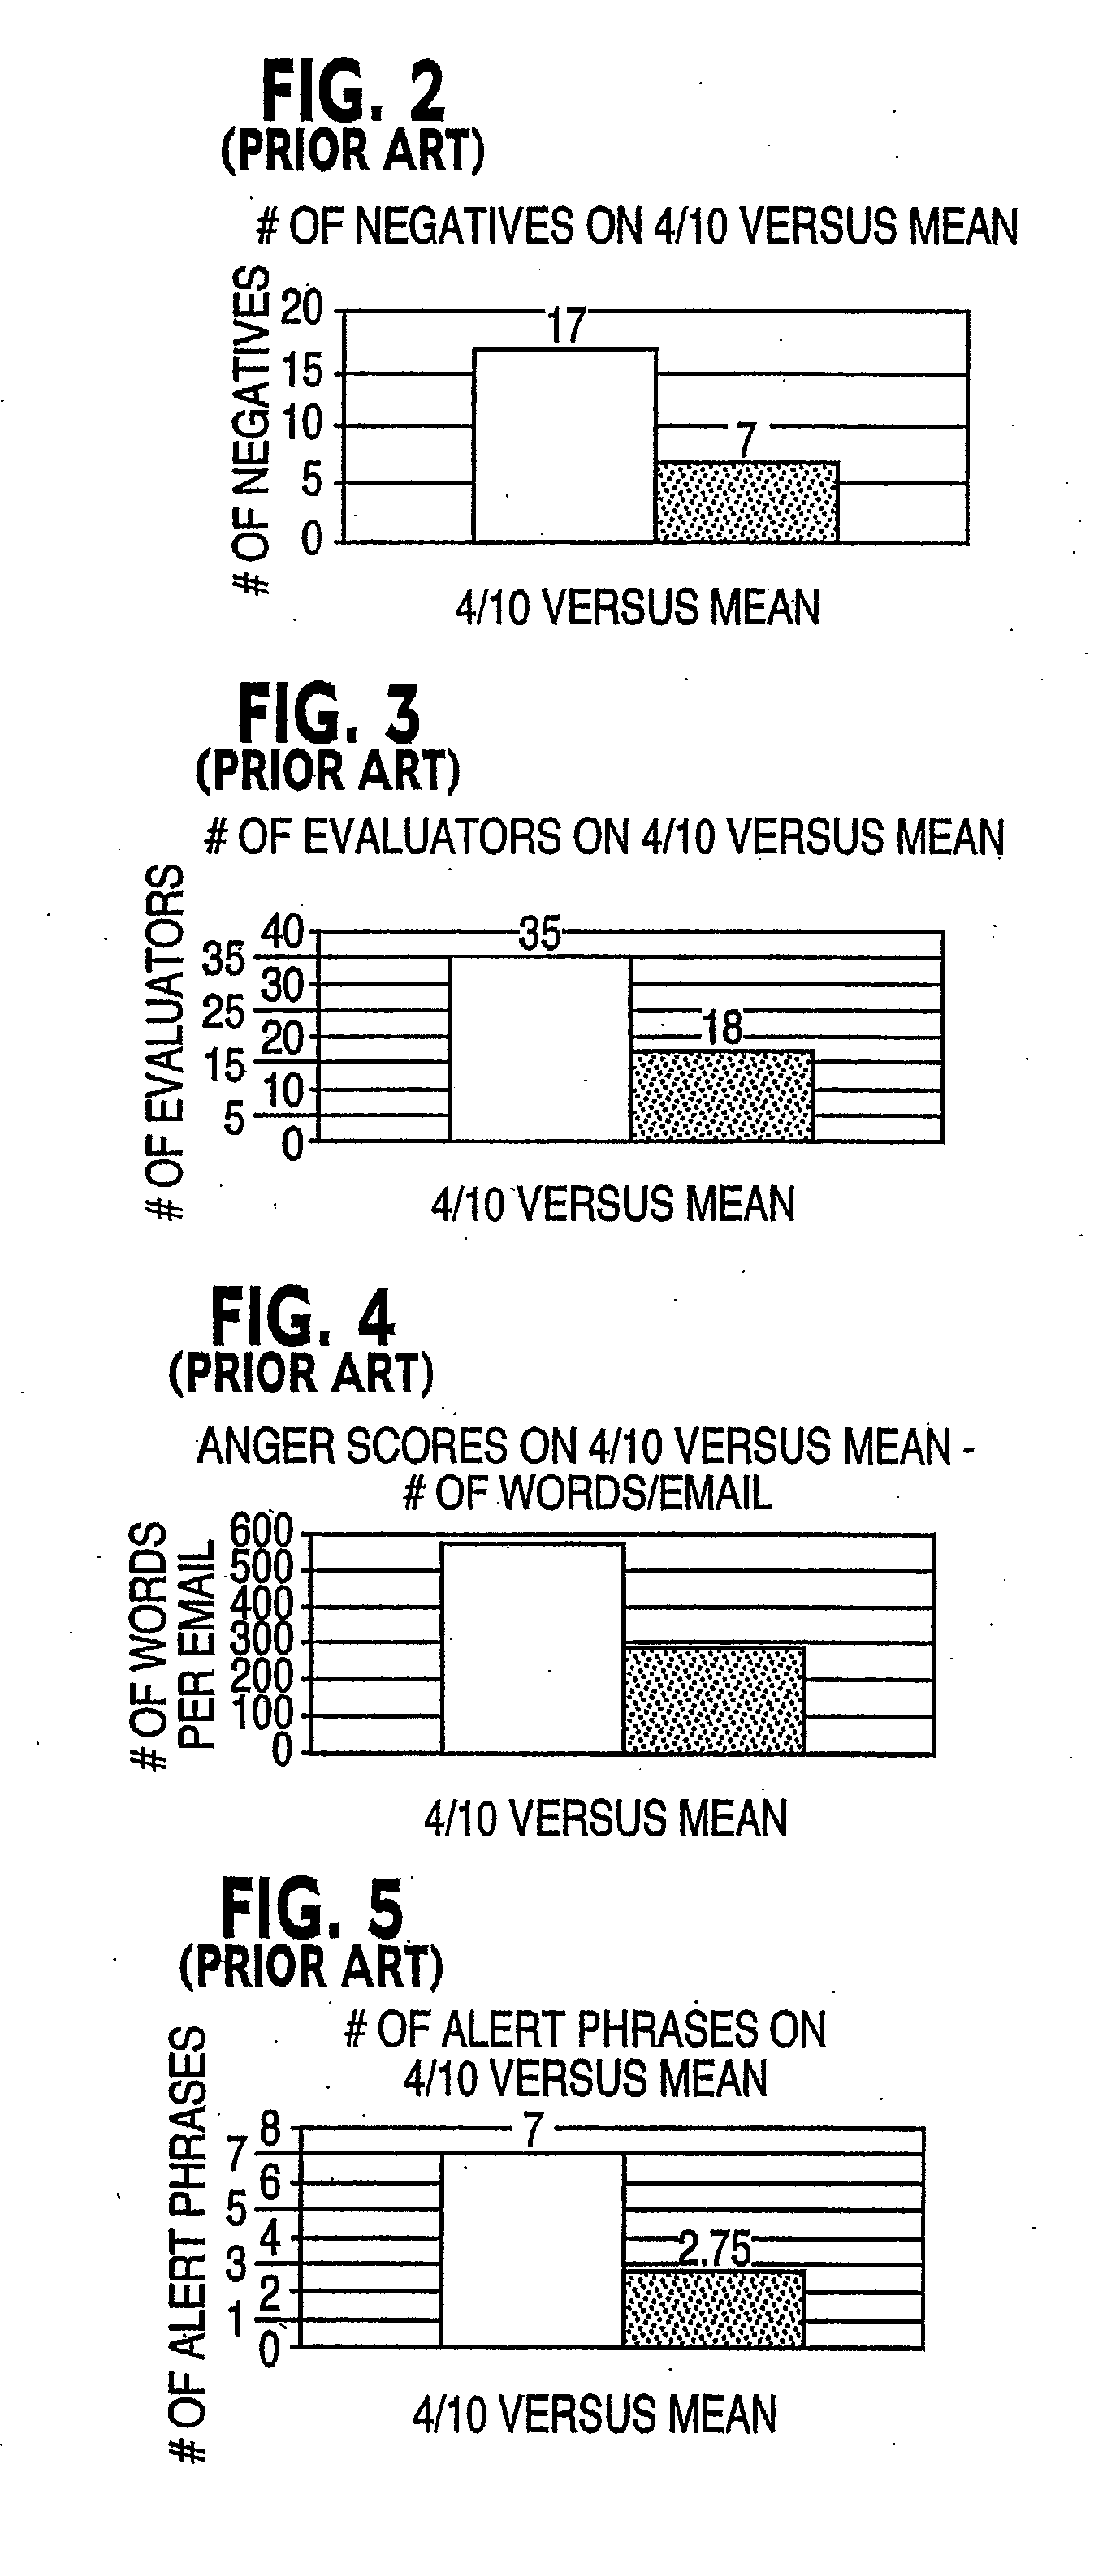 System and method for computerized psychological content analysis of computer and media generated communications to produce communications management support, indications and warnings of dangerous behavior, assessment of media images, and personnel selection support